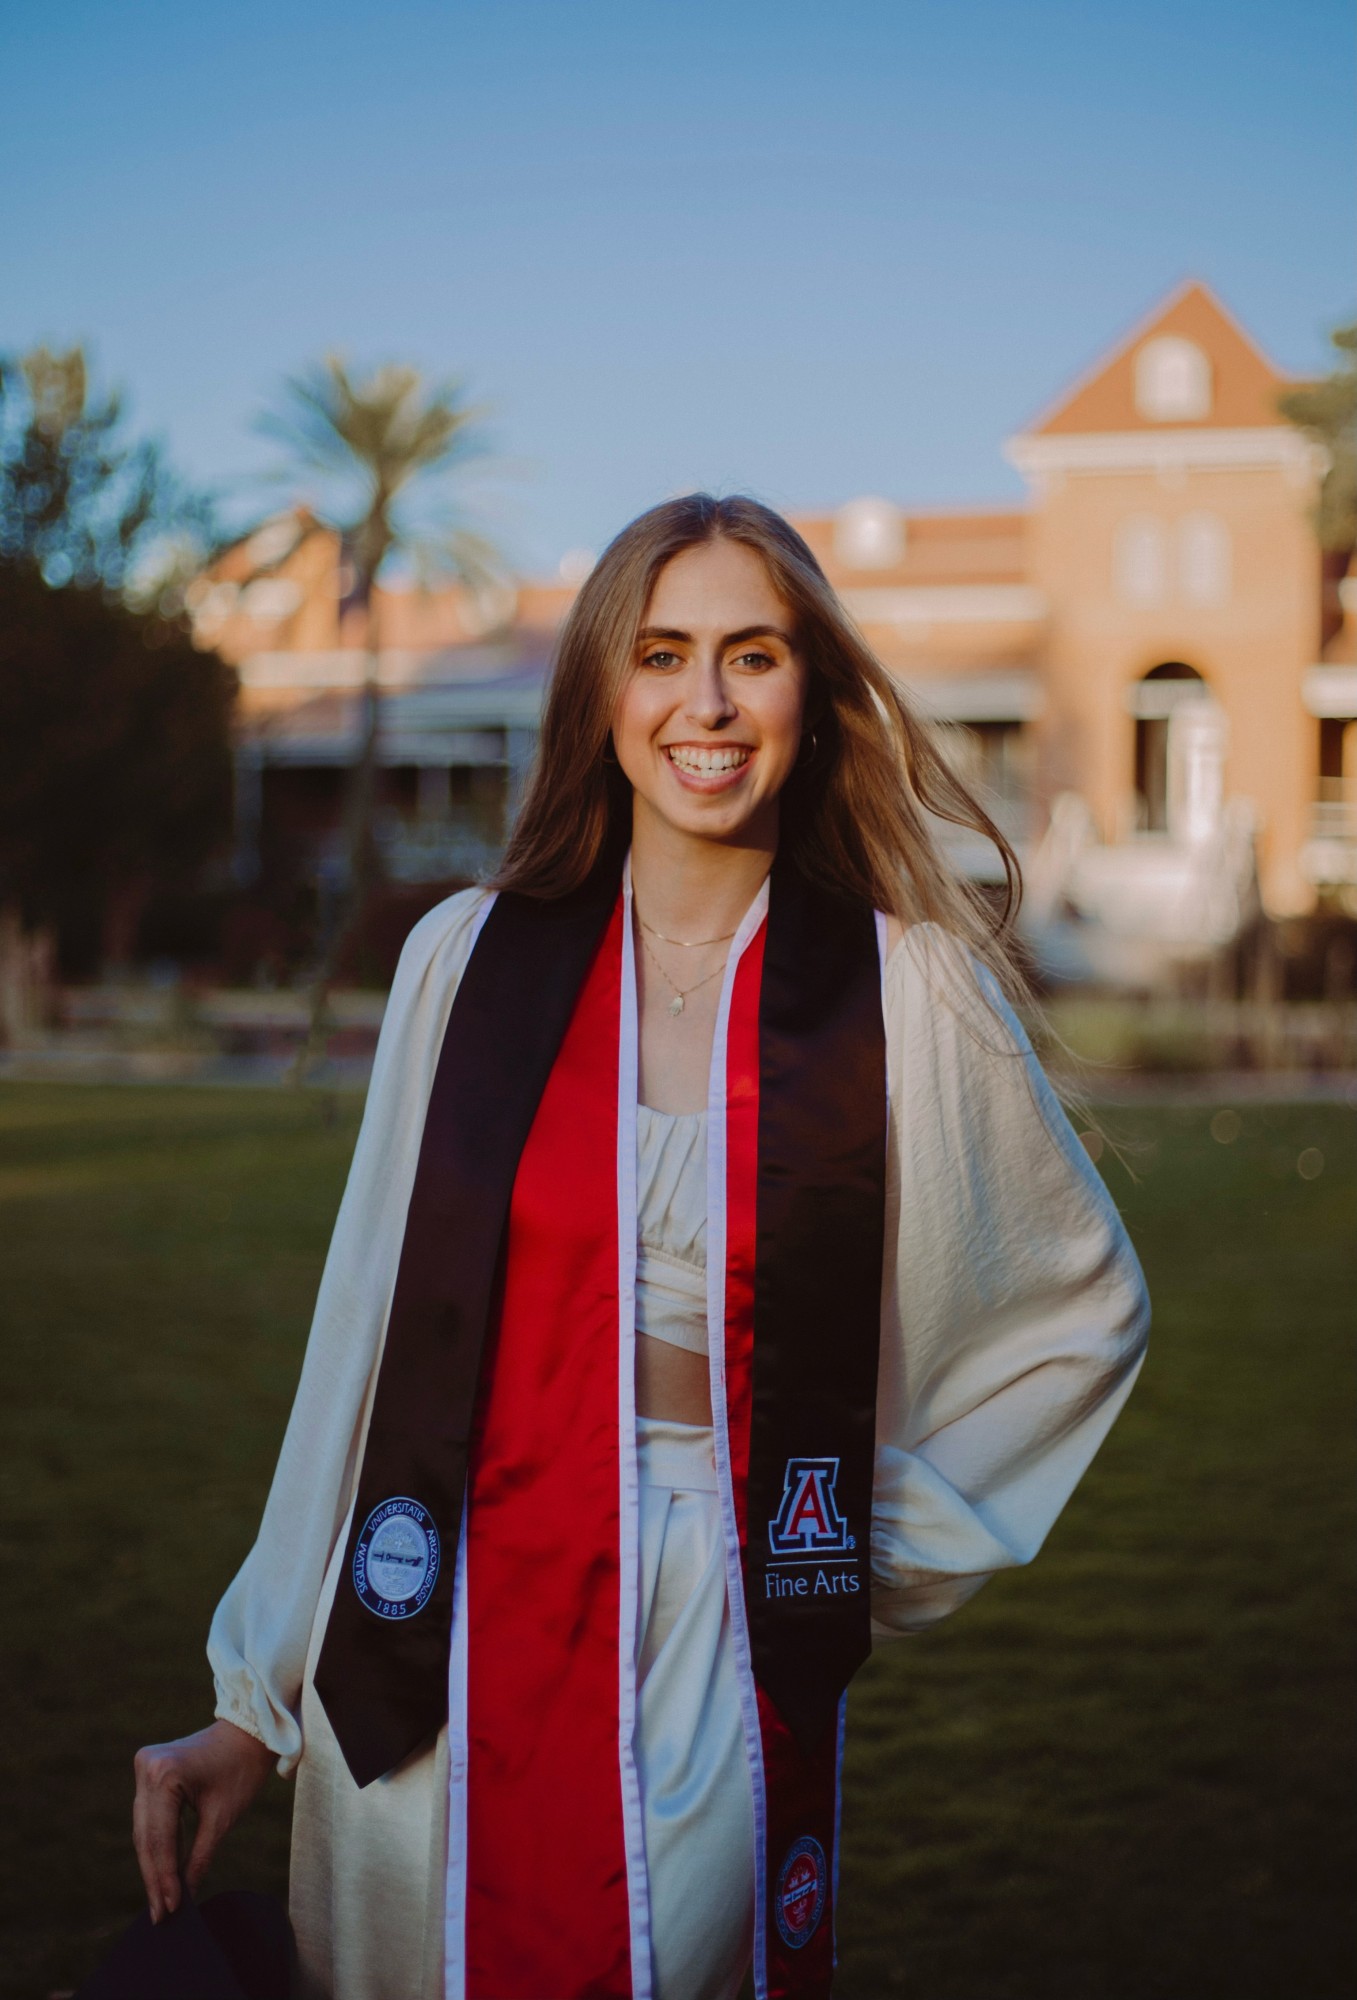 As soon as she graduates this May with her undergraduate degree in film from the University of Arizona, Hadas Bar plans to jump right into pursuing her film career. Her first step is moving back to L.A.